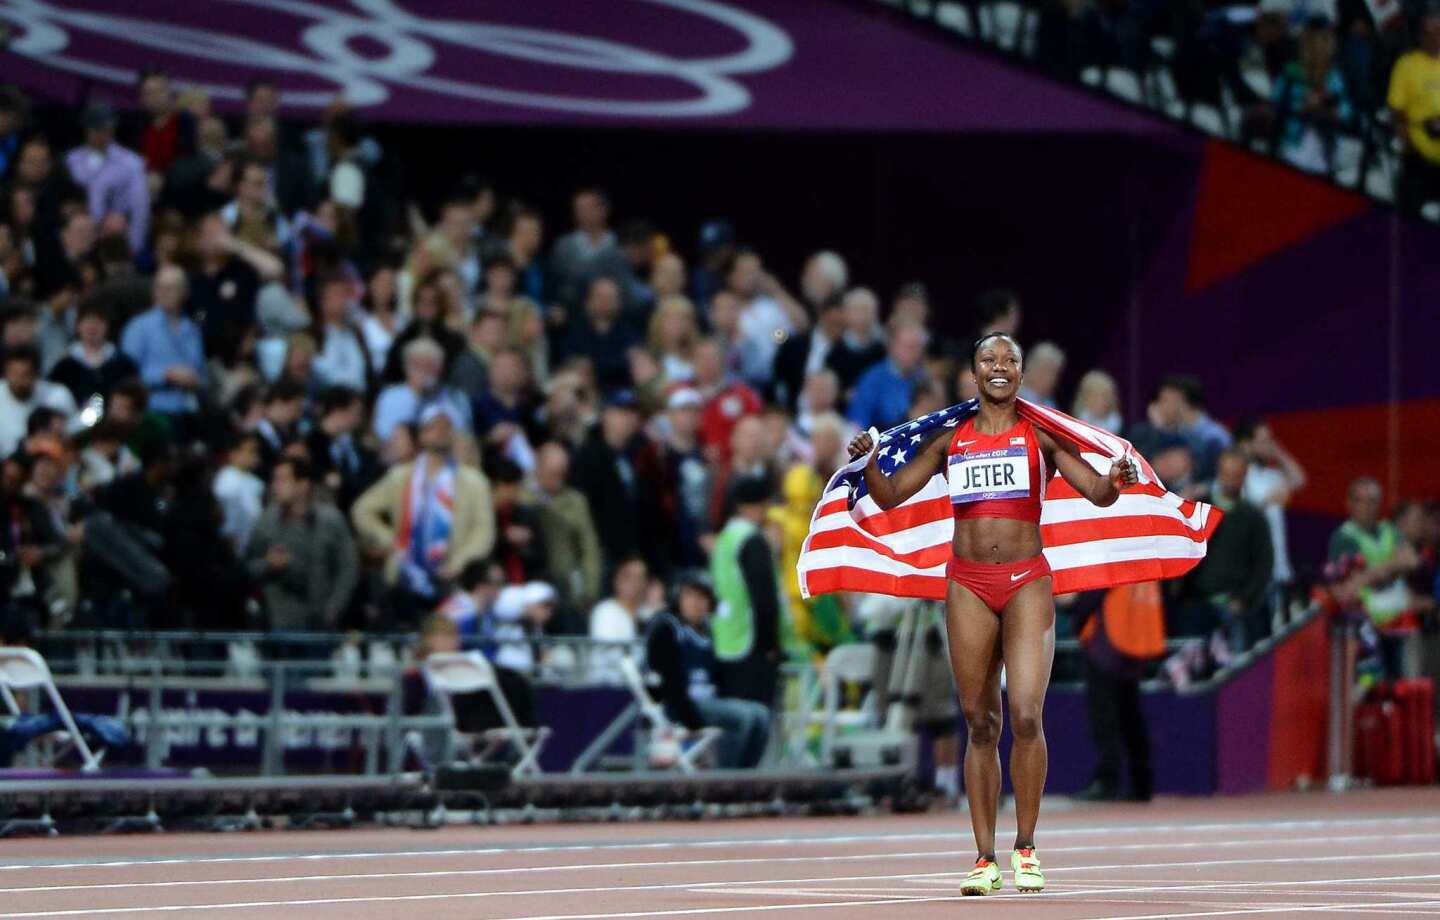 Carmelita Jeter carries the American flag after winning the silver medal in the 100 meters at the 2012 London Olympics.